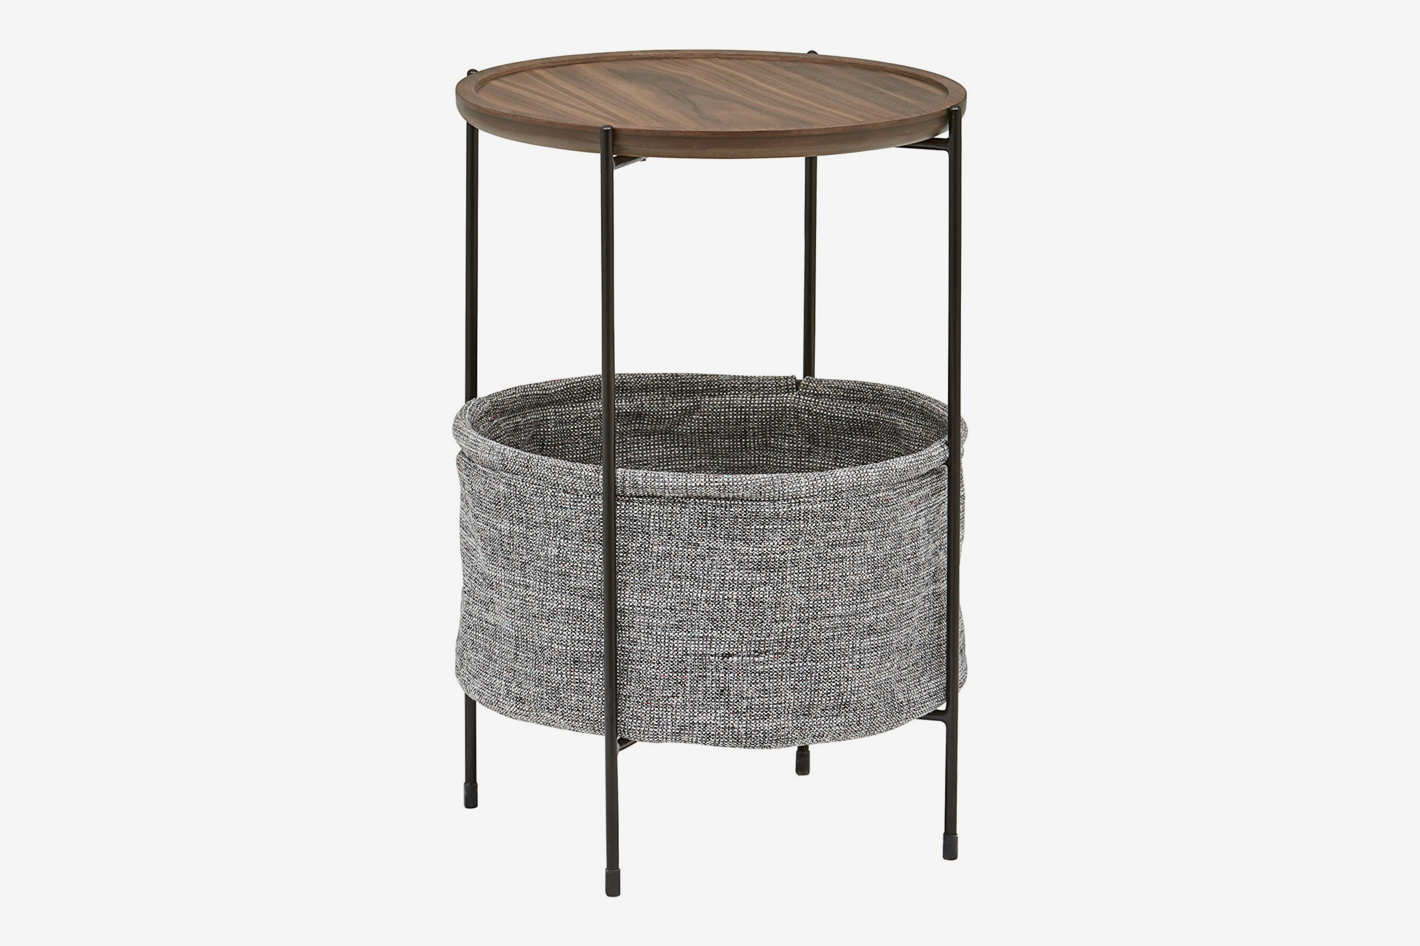 wicker storage baskets that look like decor rivet meeks round basket side table target patio accent sturdy bar stools cherry coffee and end tables corner nook white rectangle